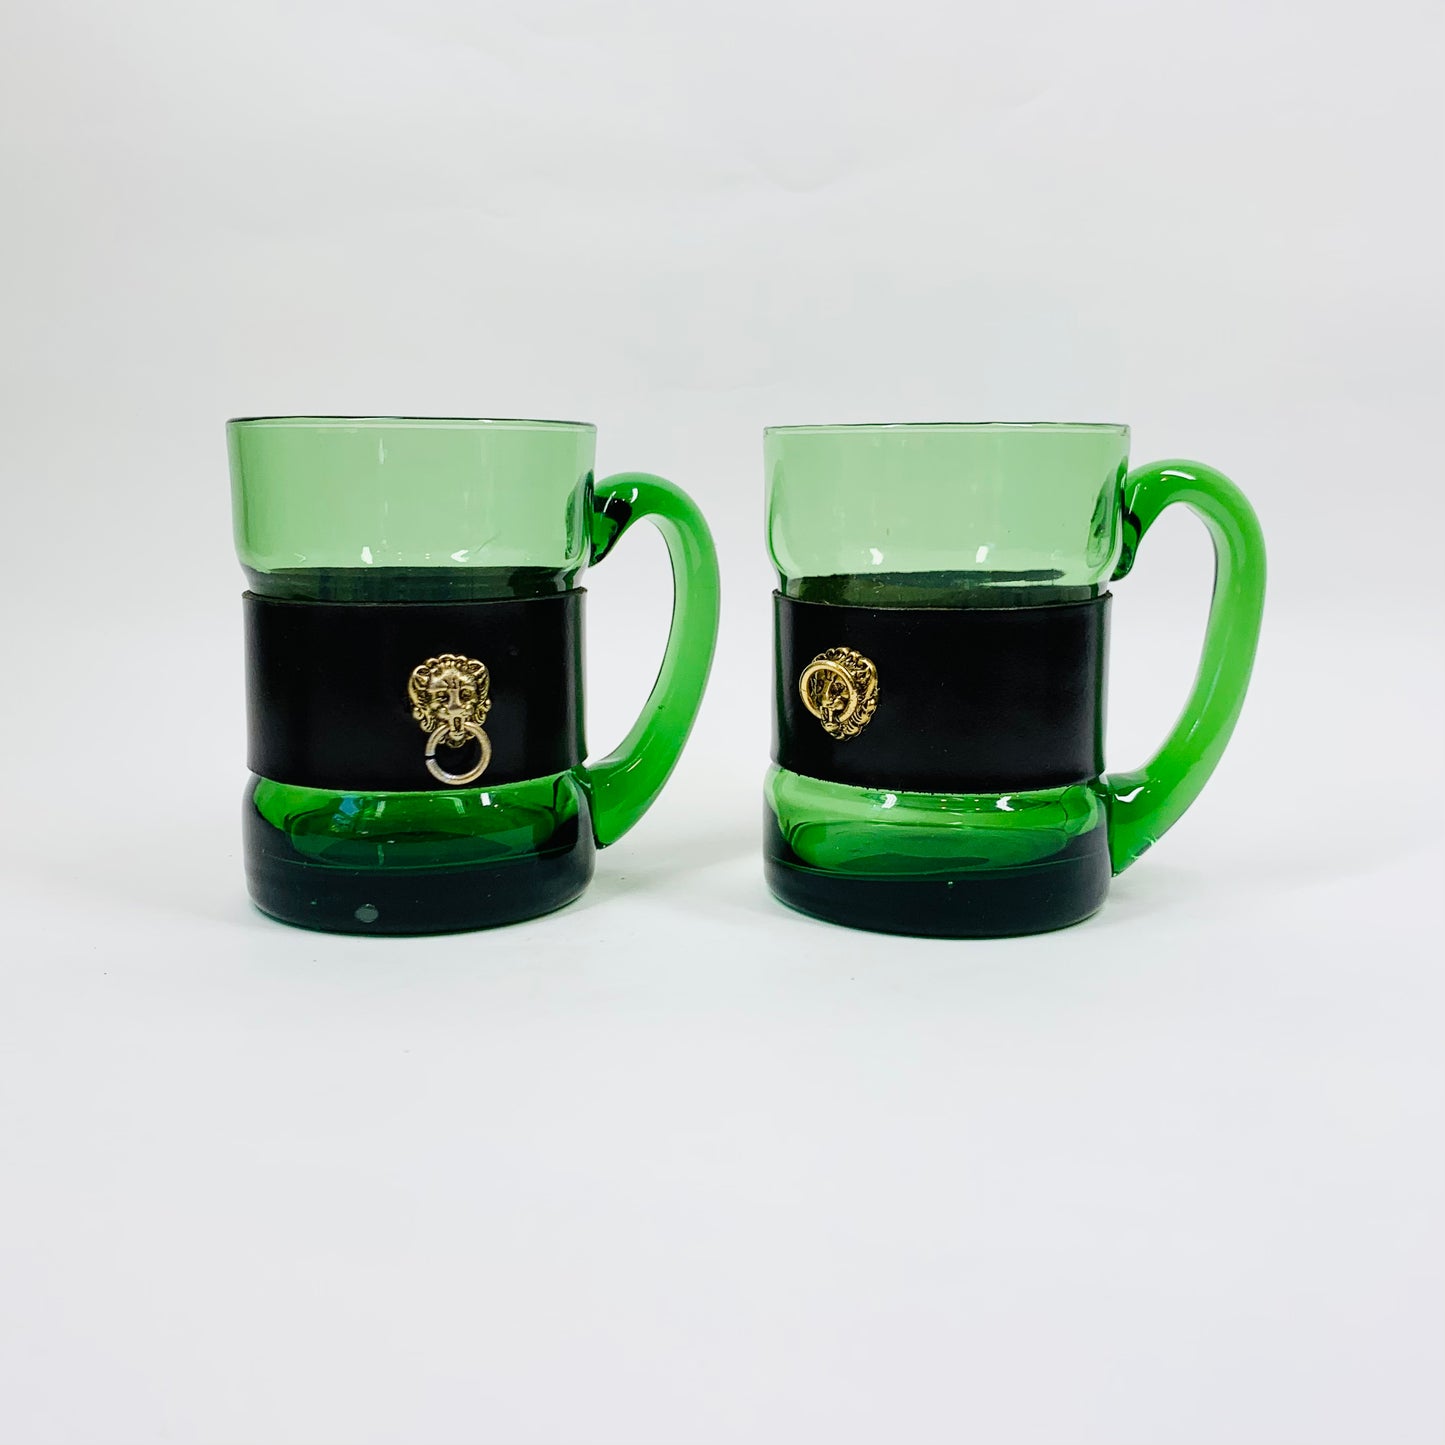 Rare Midcentury Italian green glass set with detachable leather sleeves